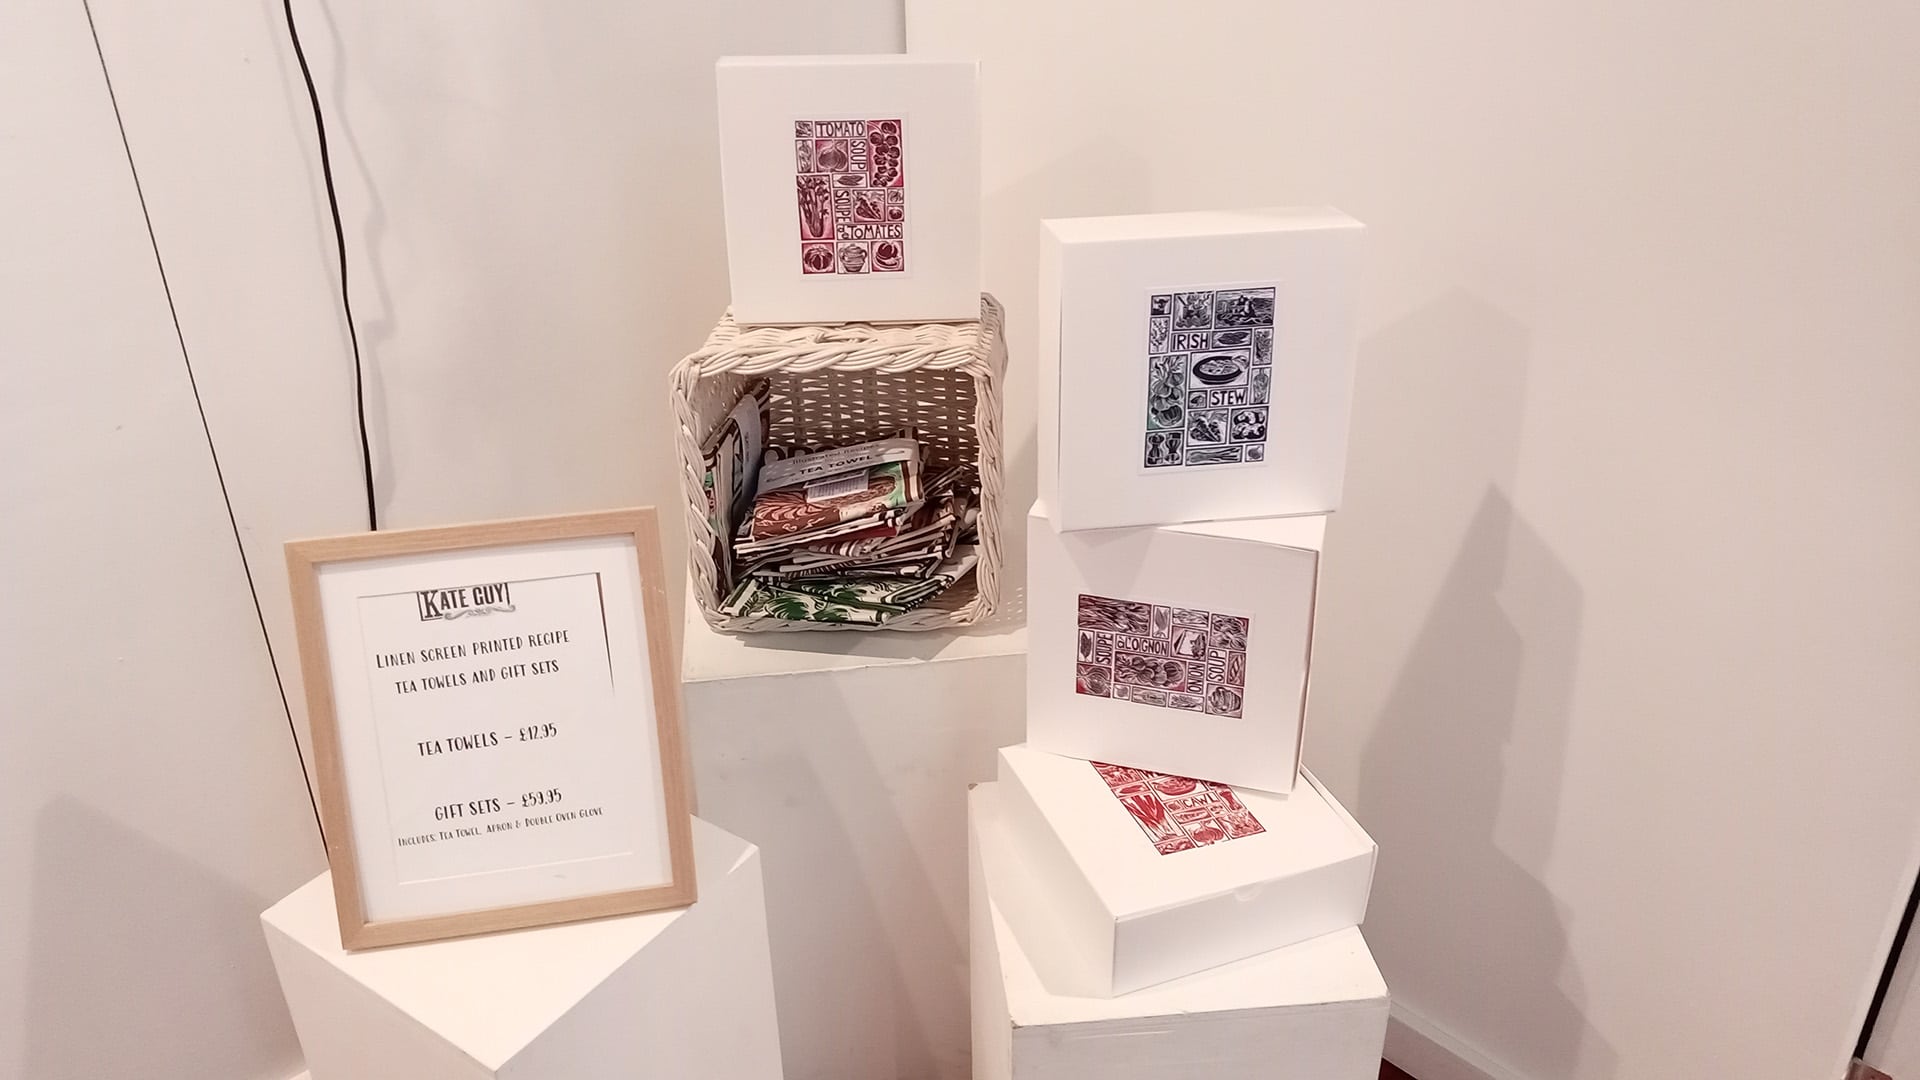 A photograph of hand crafted gifts laid out in a decorative way, with a sign stating the price of gift sets and tea towels.